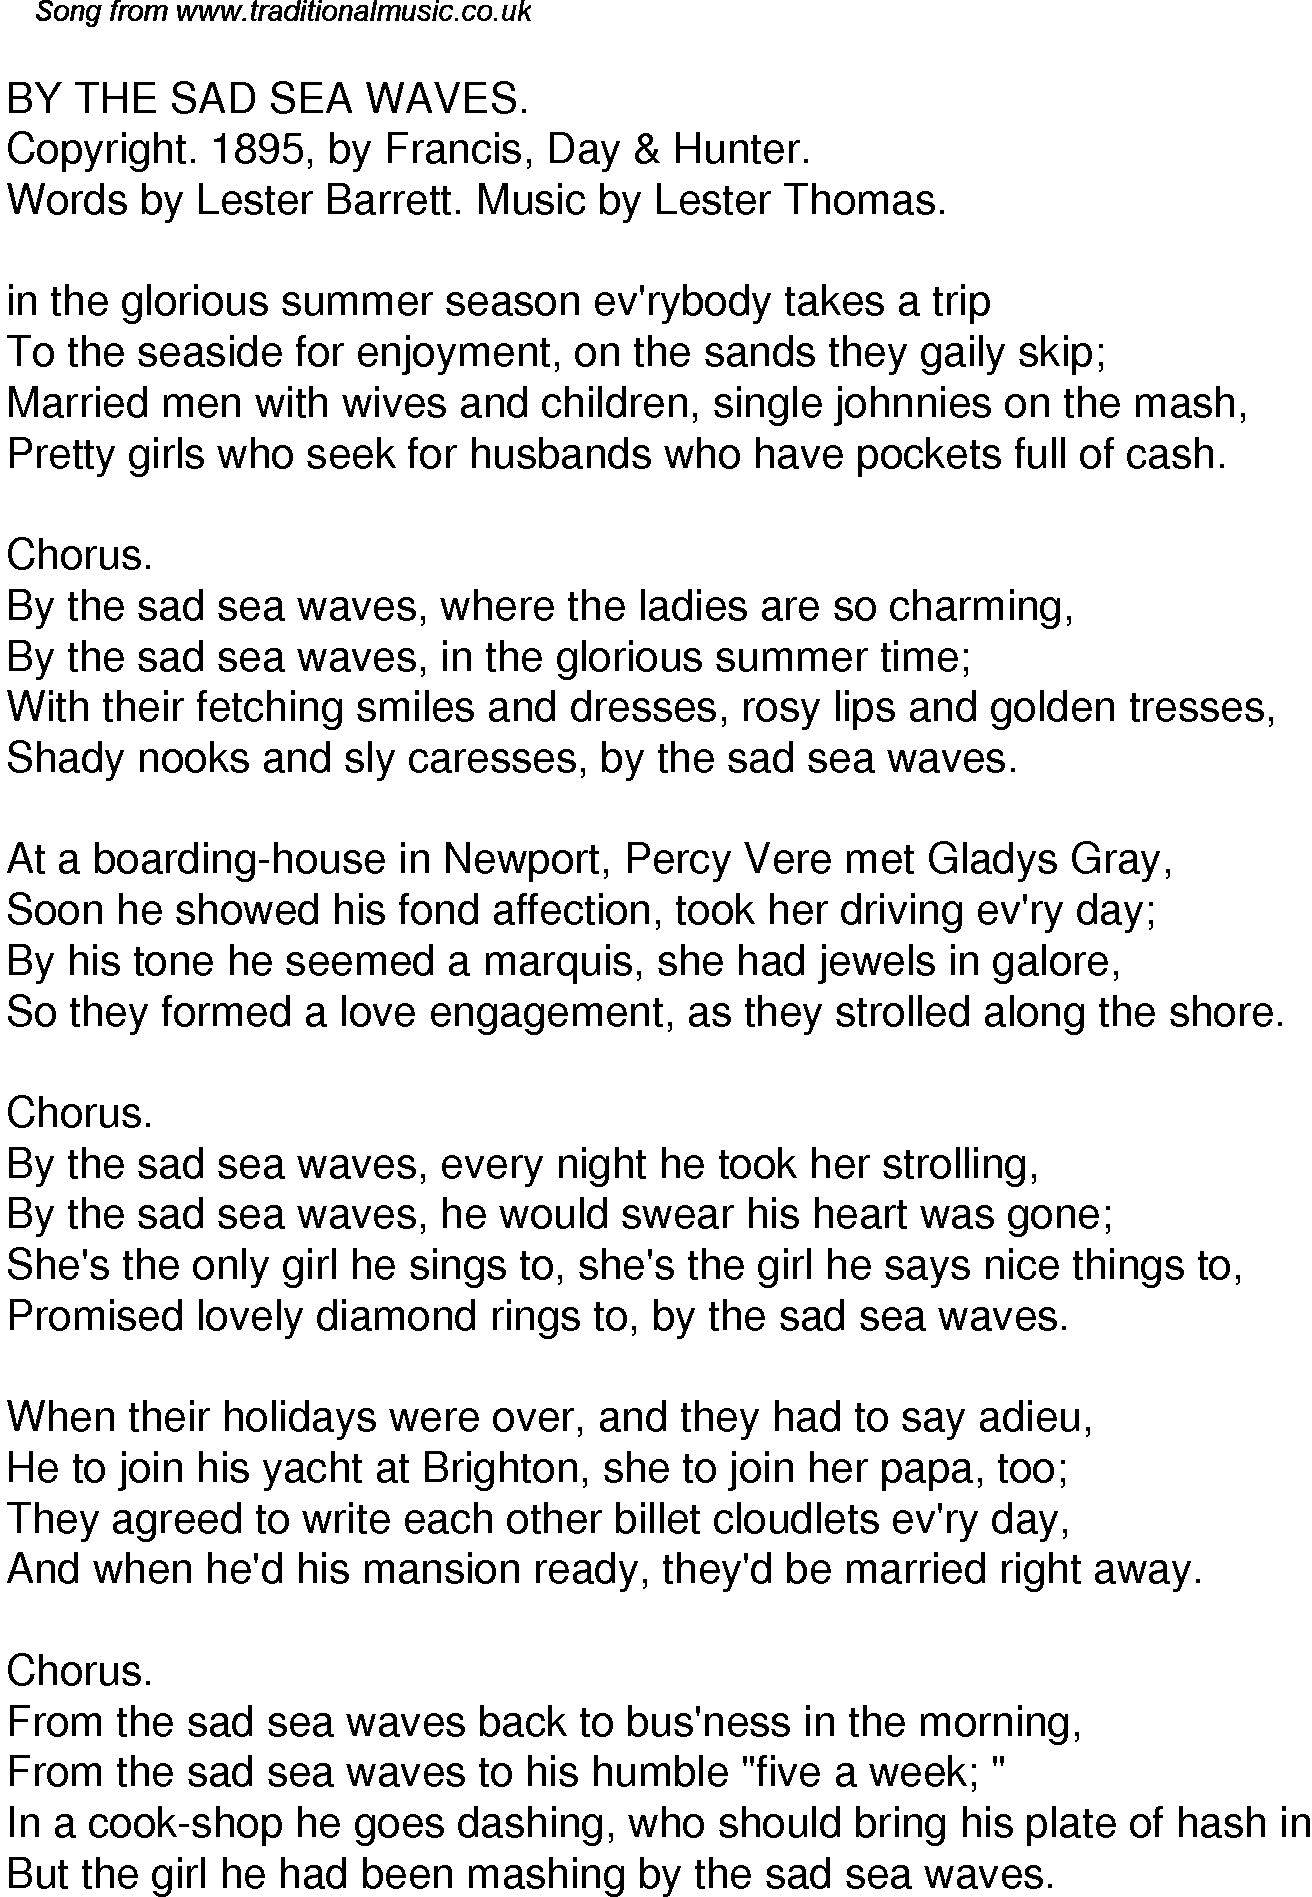 Old Time Song Lyrics for 24 By The Sad Sea Waves